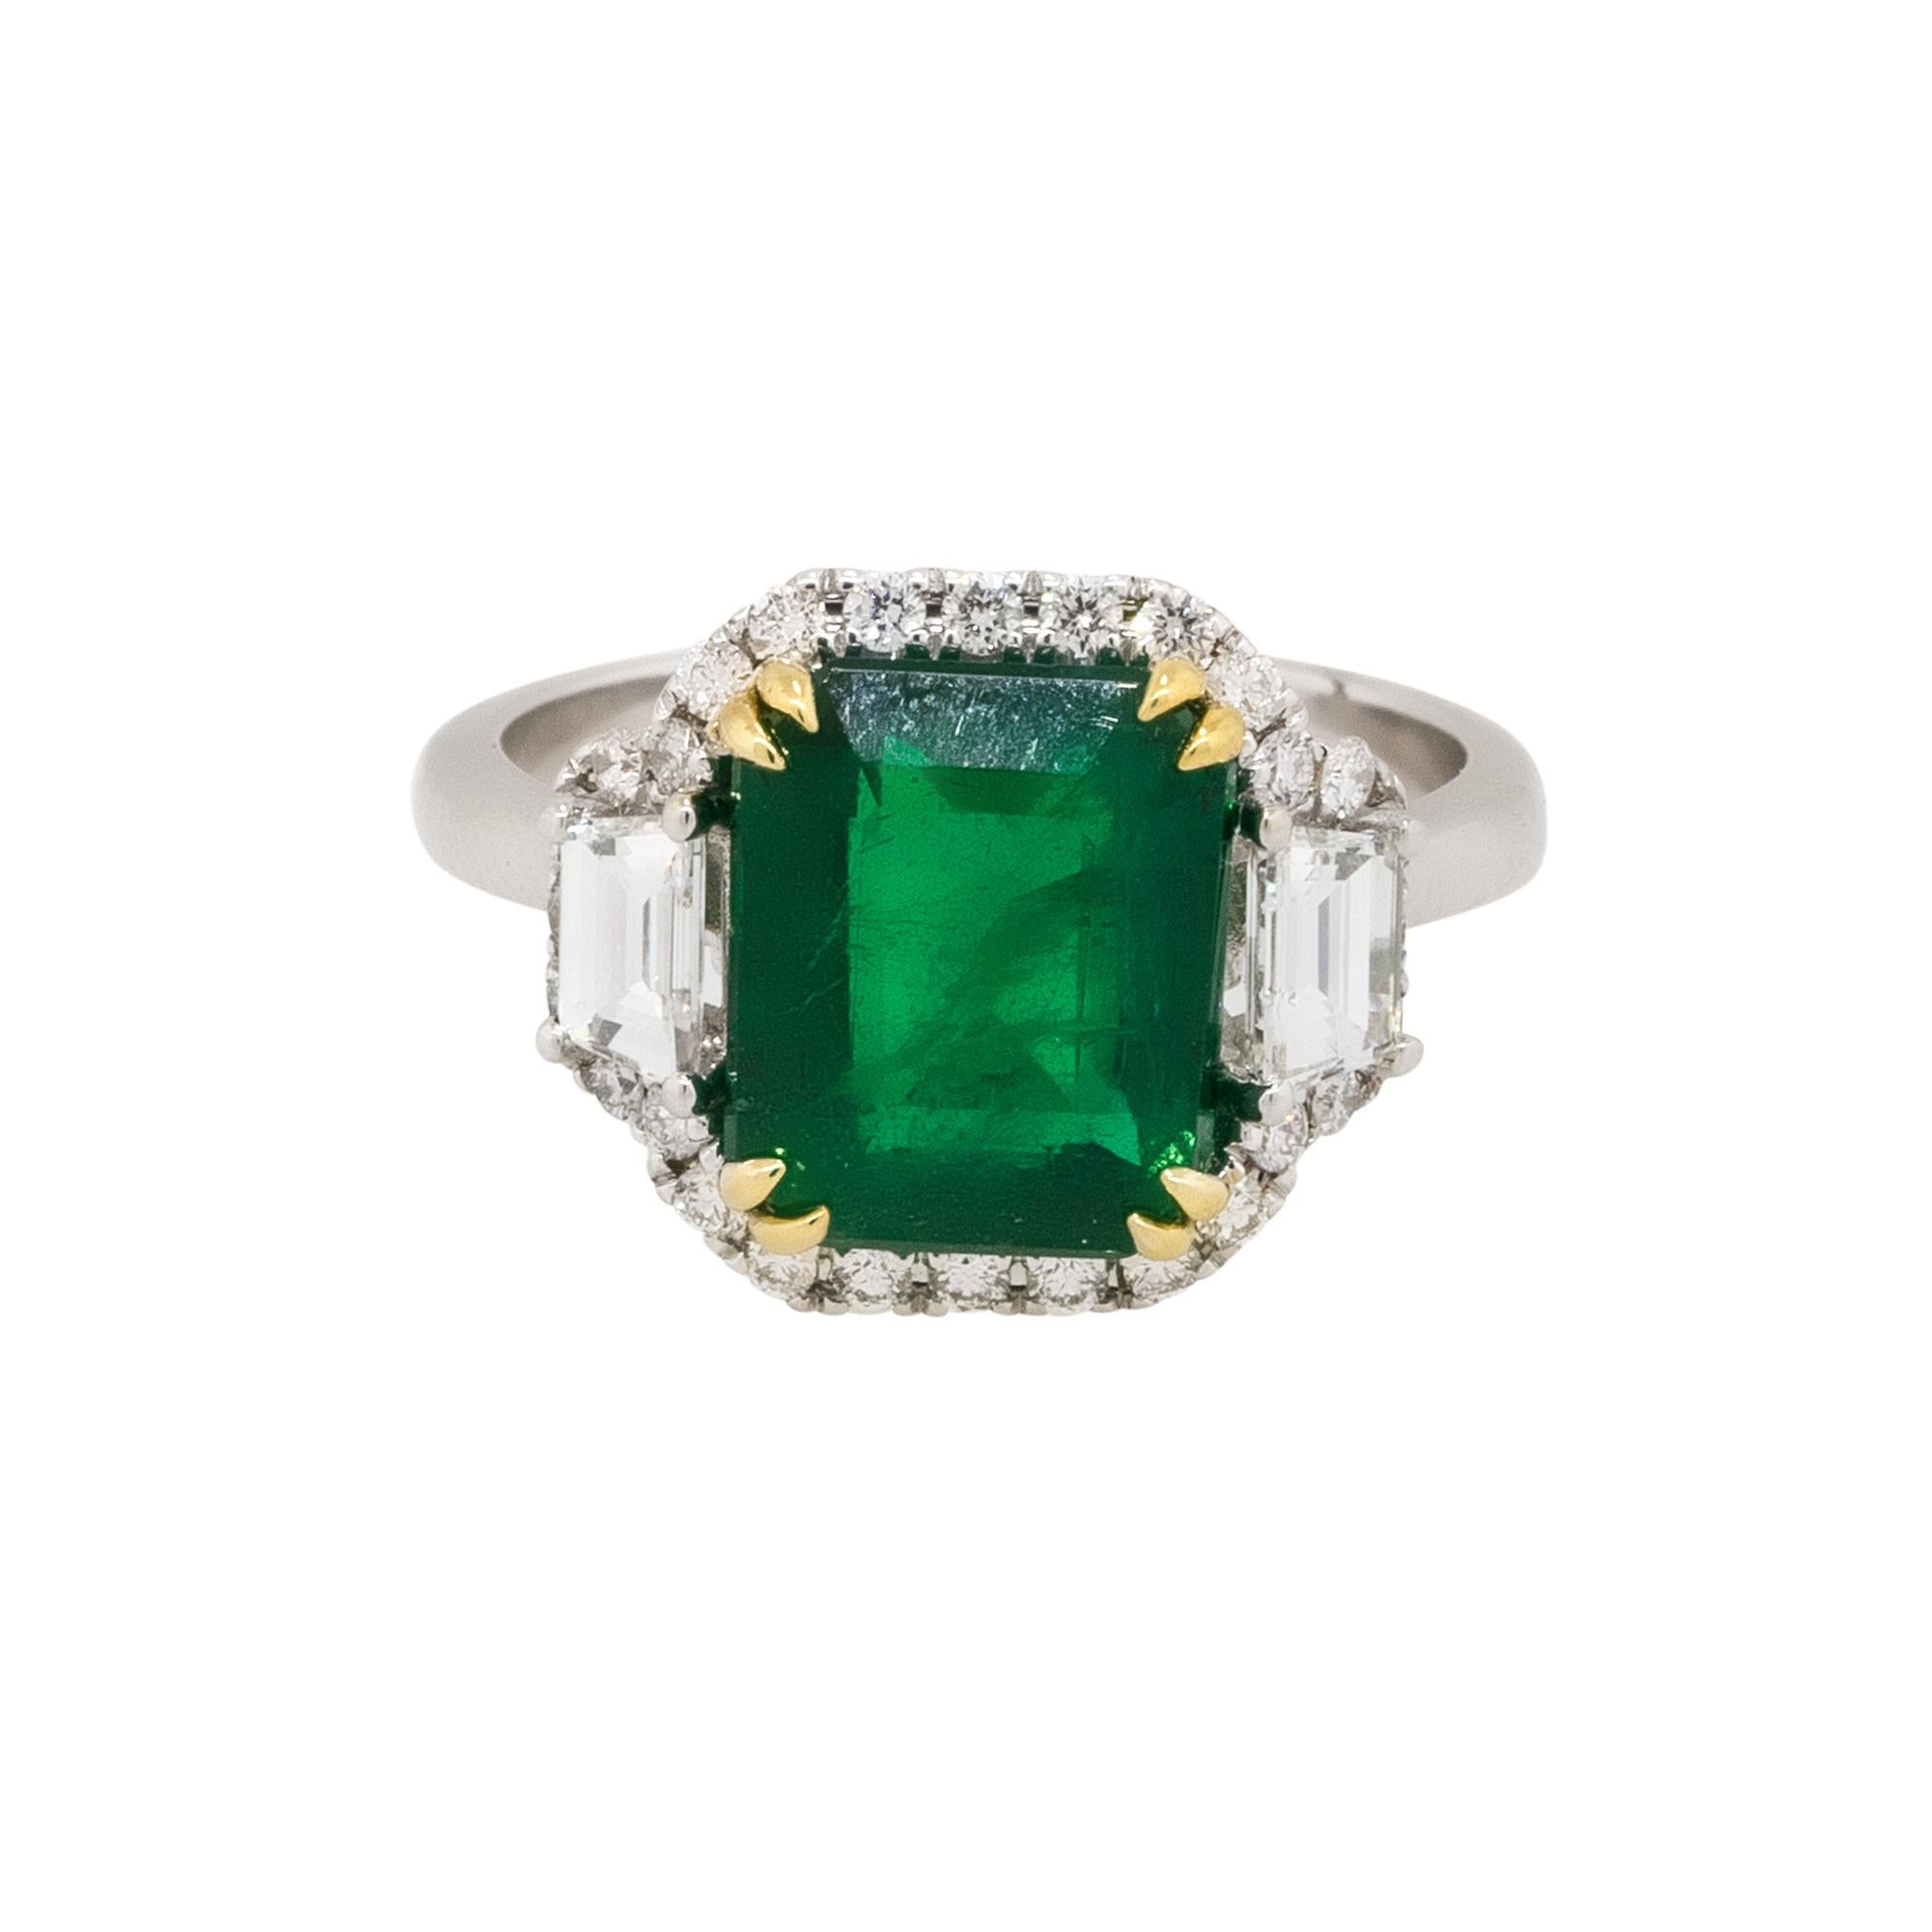 Material: 18k white gold and 18k yellow gold 
Diamond Details: Approx. 0.85ctw of trapezoid and round brilliant Diamonds. Diamonds are G/H in color and VS in clarity
Gemstone Details: Approx. 4.11ctw Emerald gemstone center
Ring Size: 7
Total